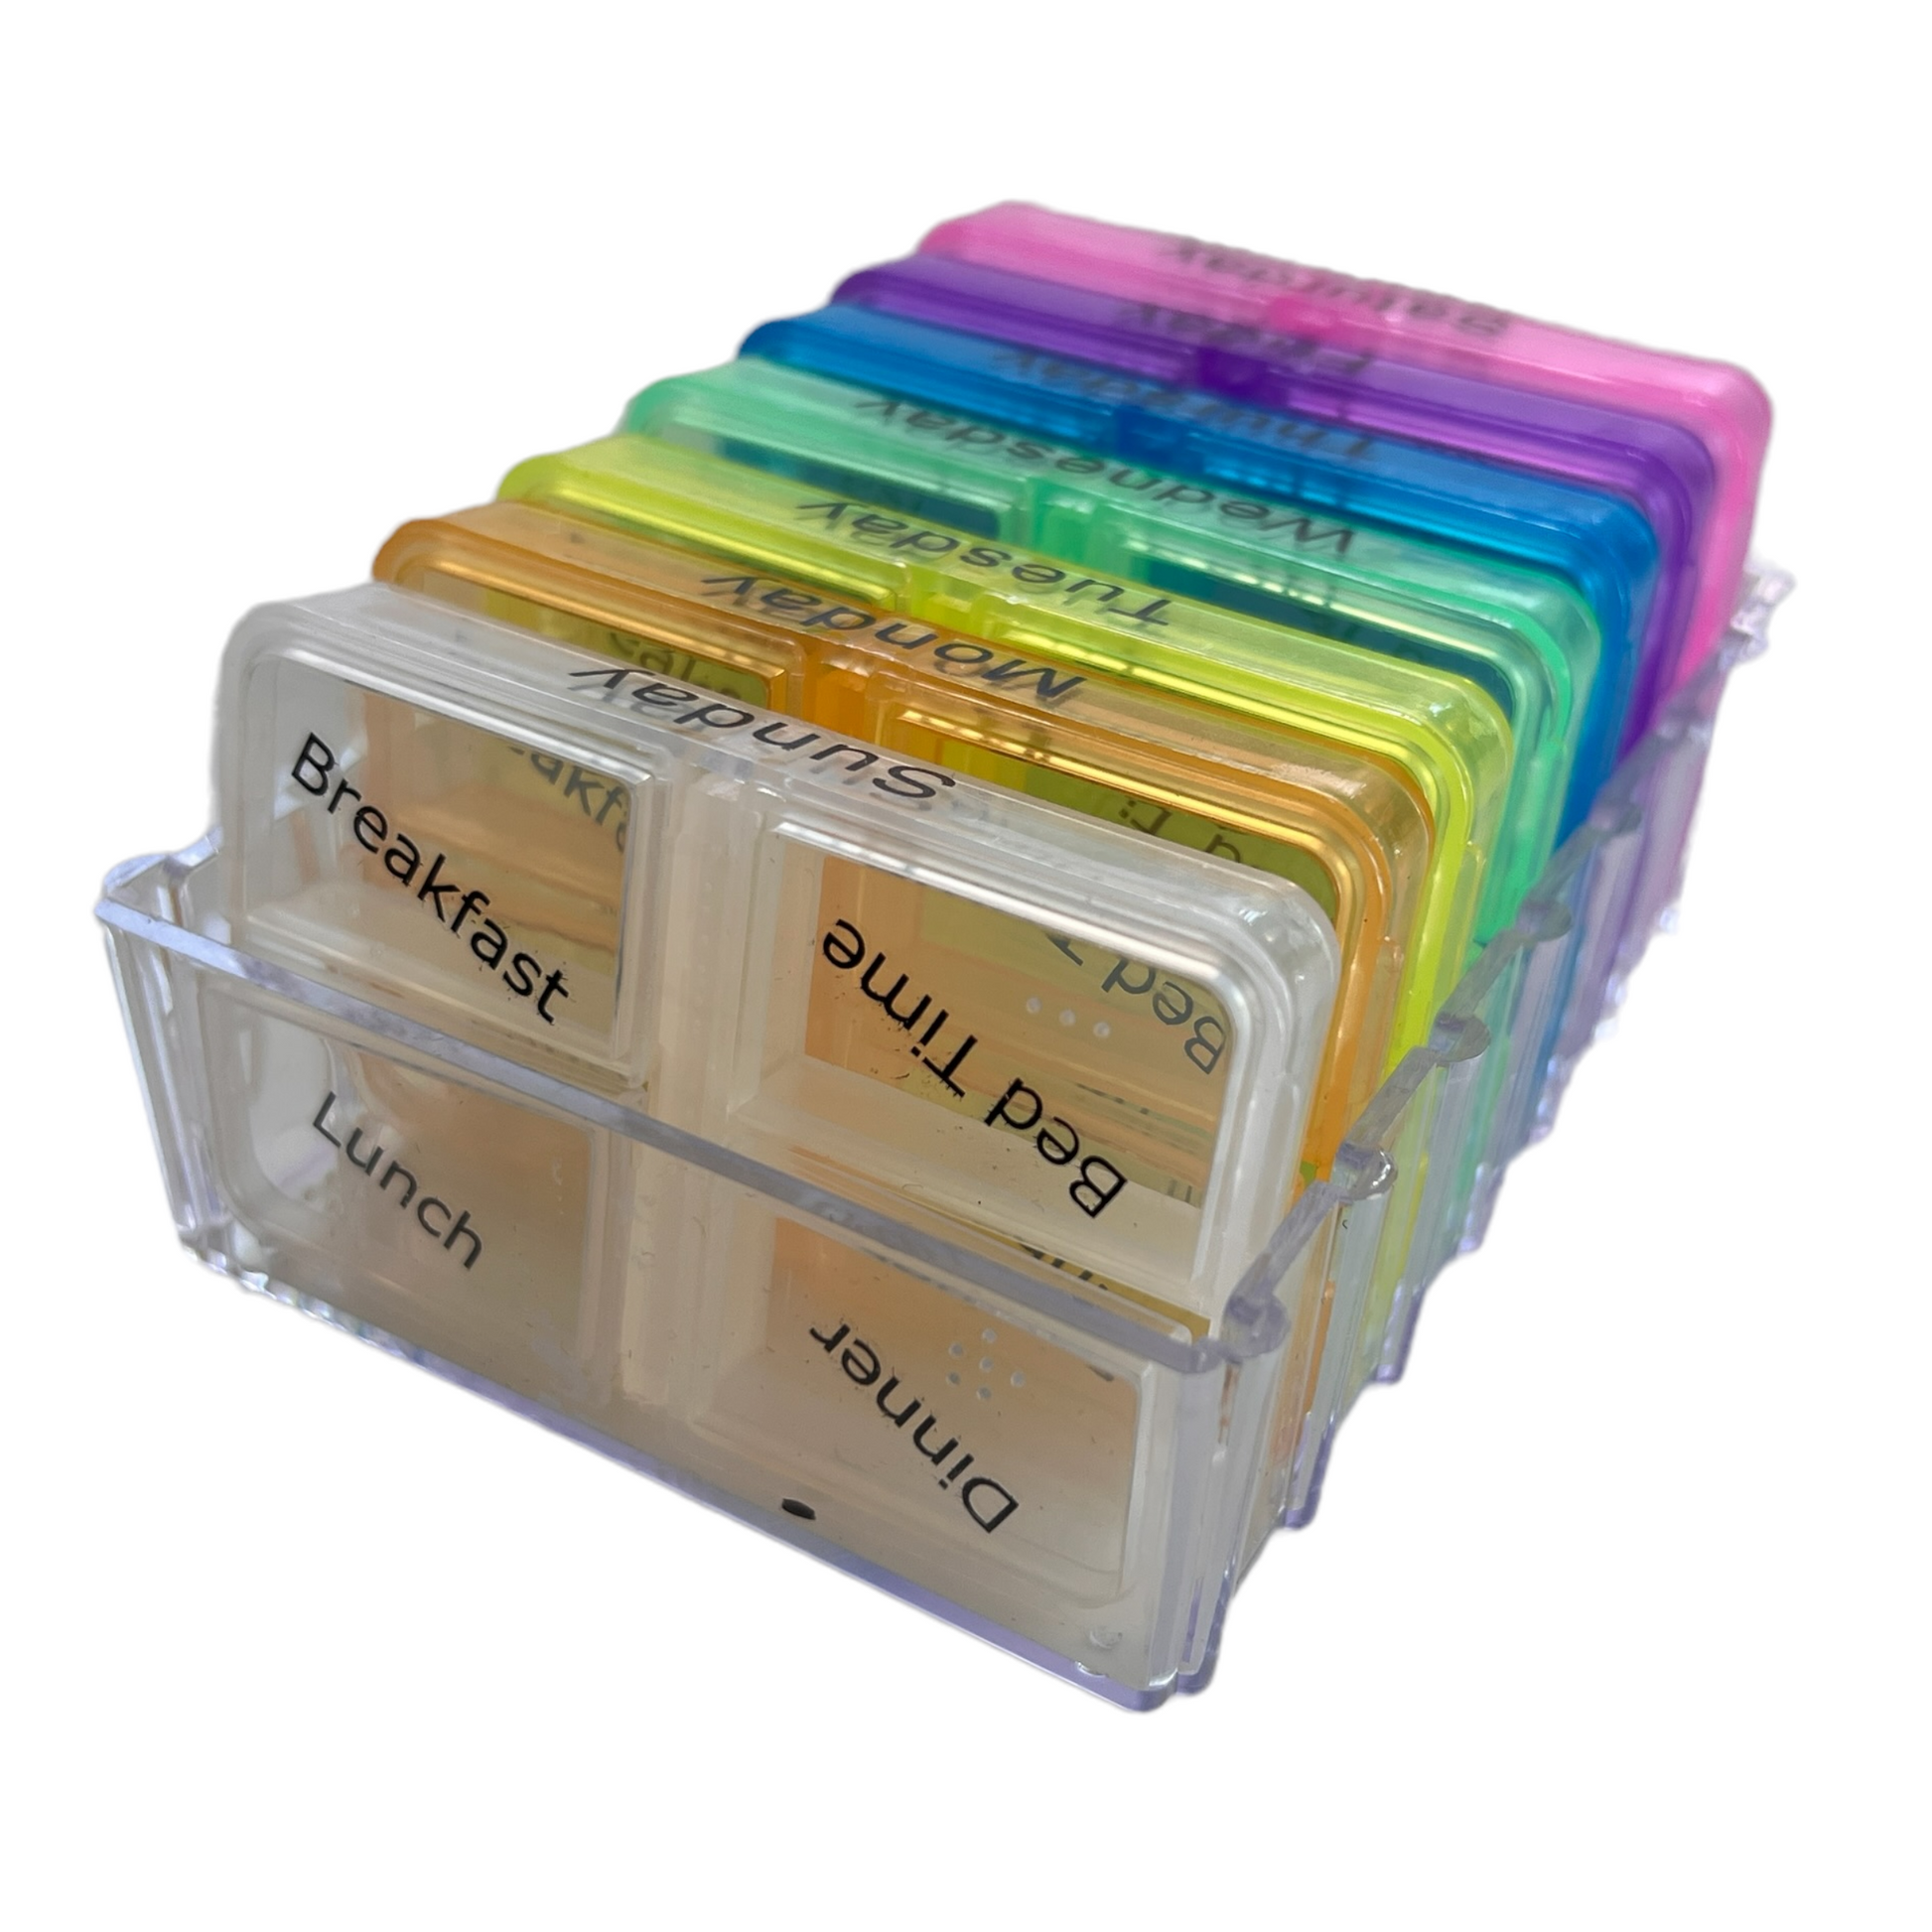 7 Day Pill Box — 4 Doses Daily - COMPACT  SPIRIT SPARKPLUGS   